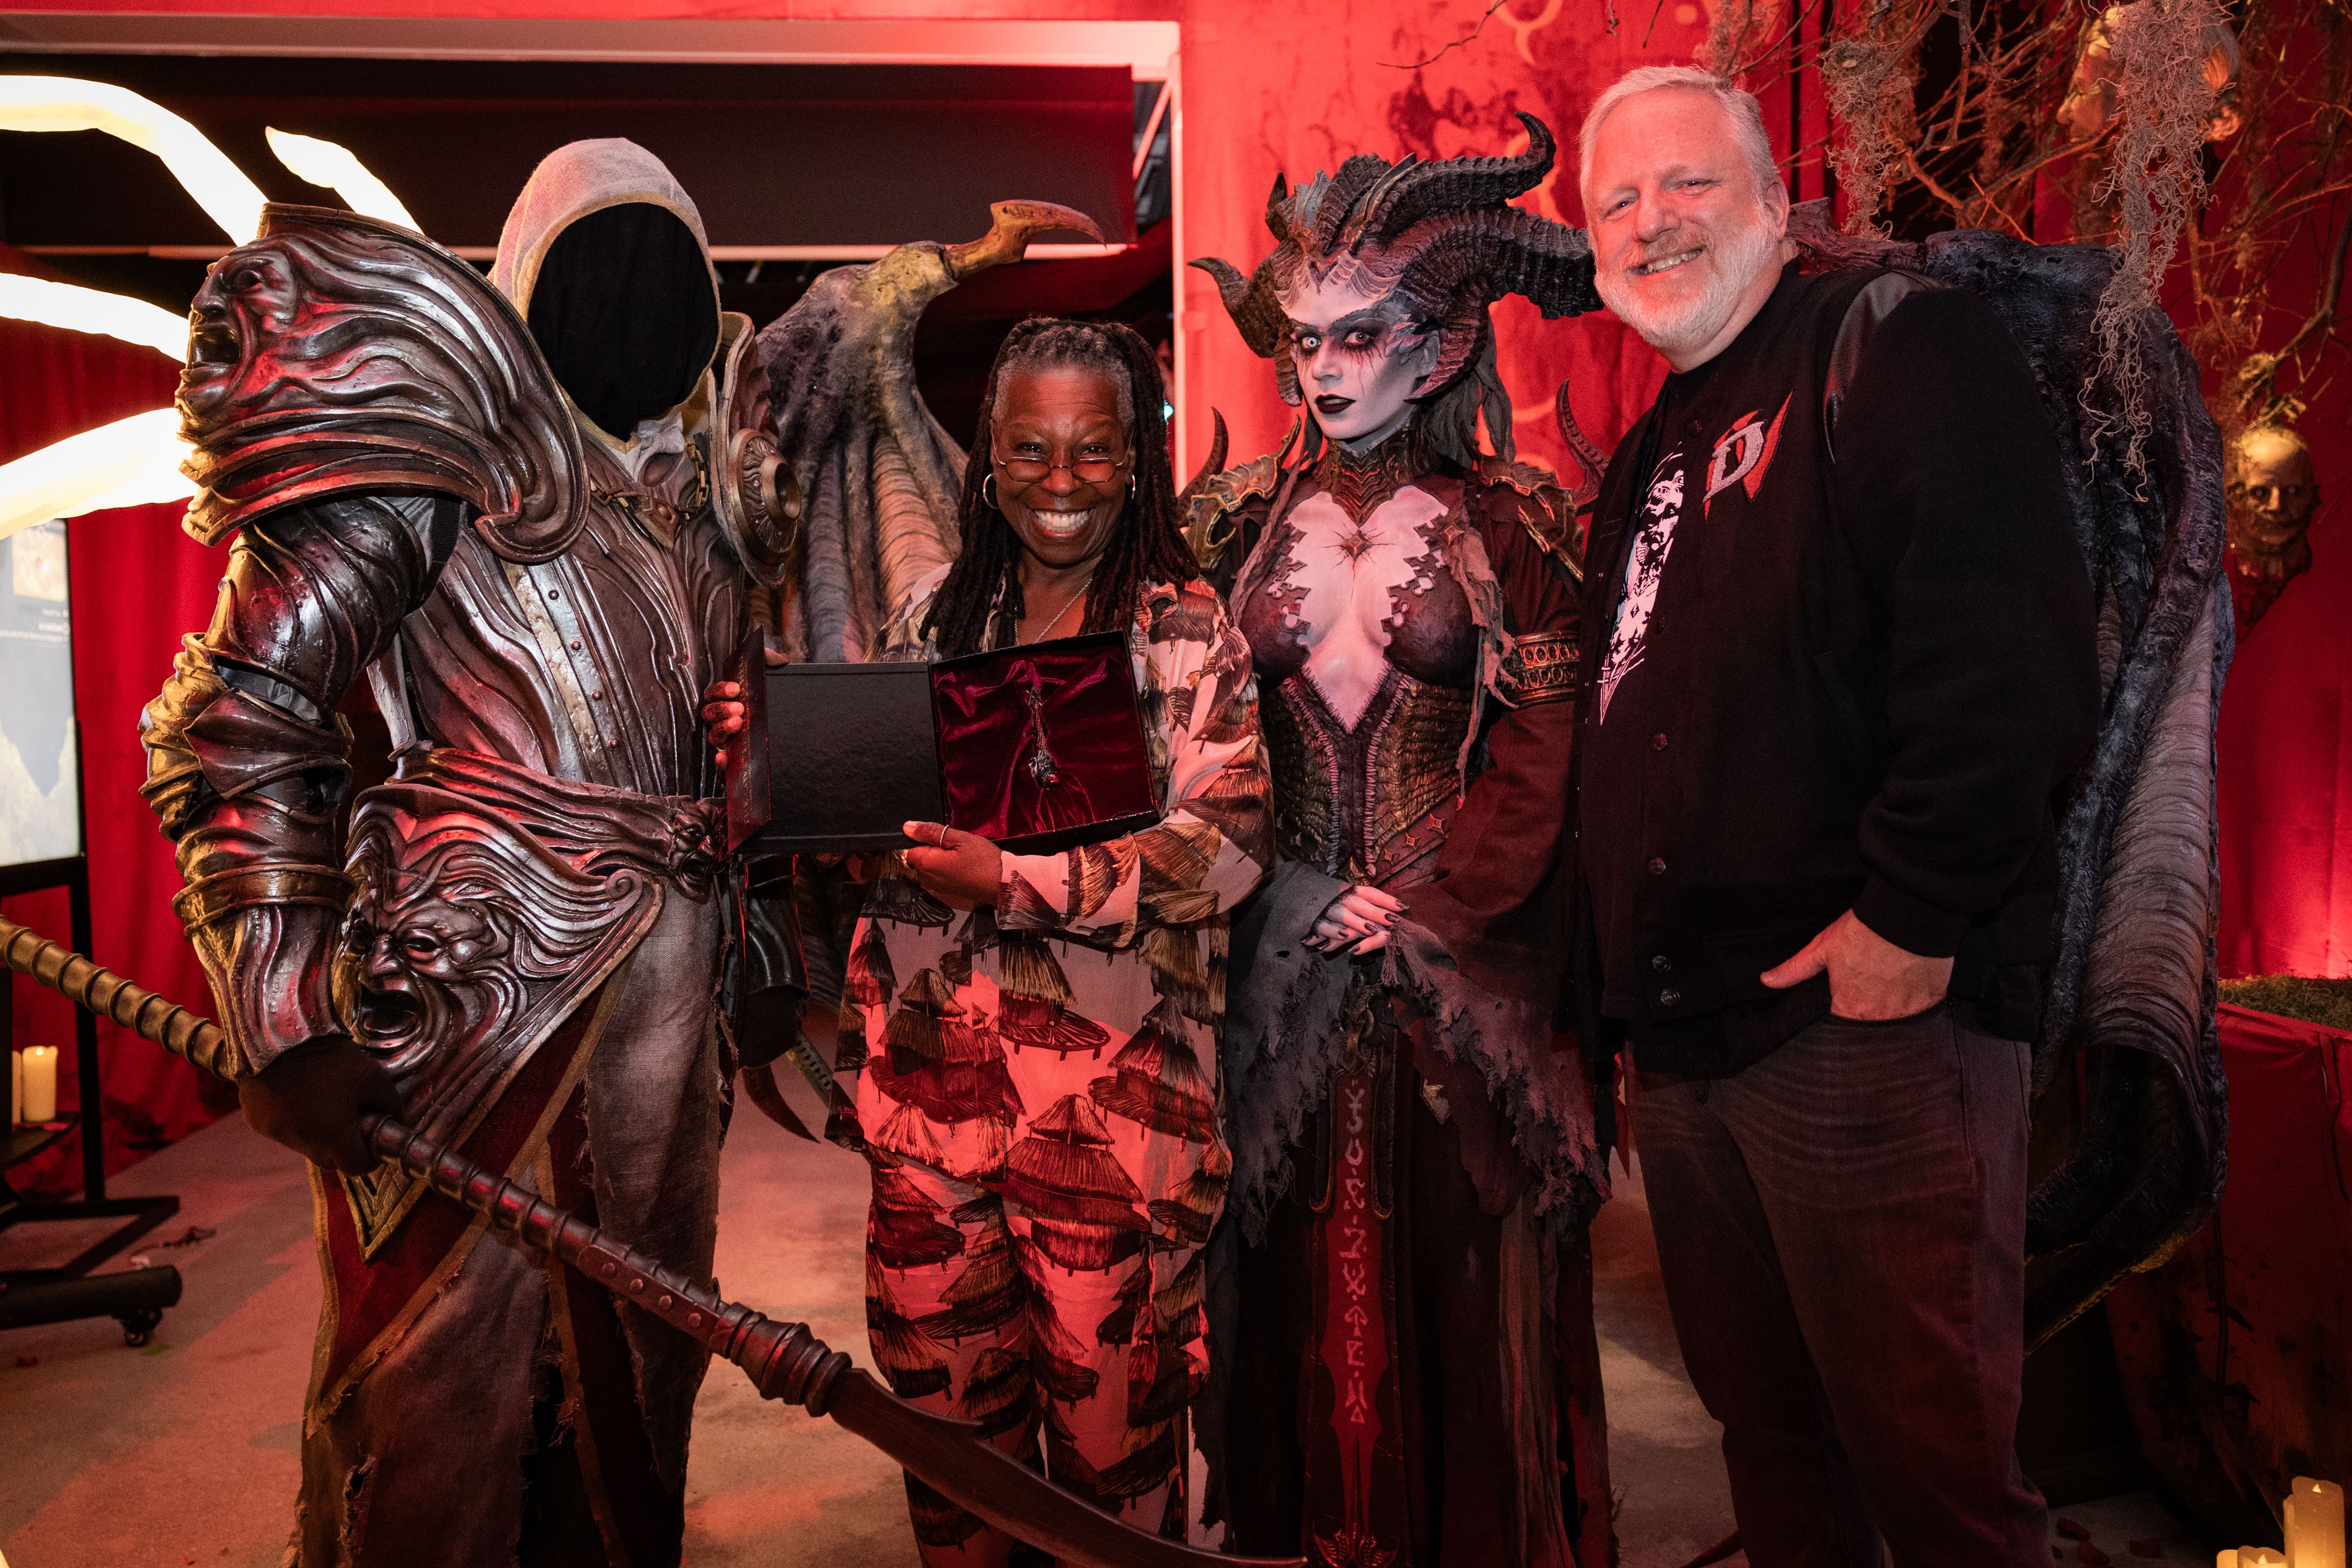 Whoopi Goldberg flanked by Lilith, Inarius, and Diablo general manager Rod Fergusson.